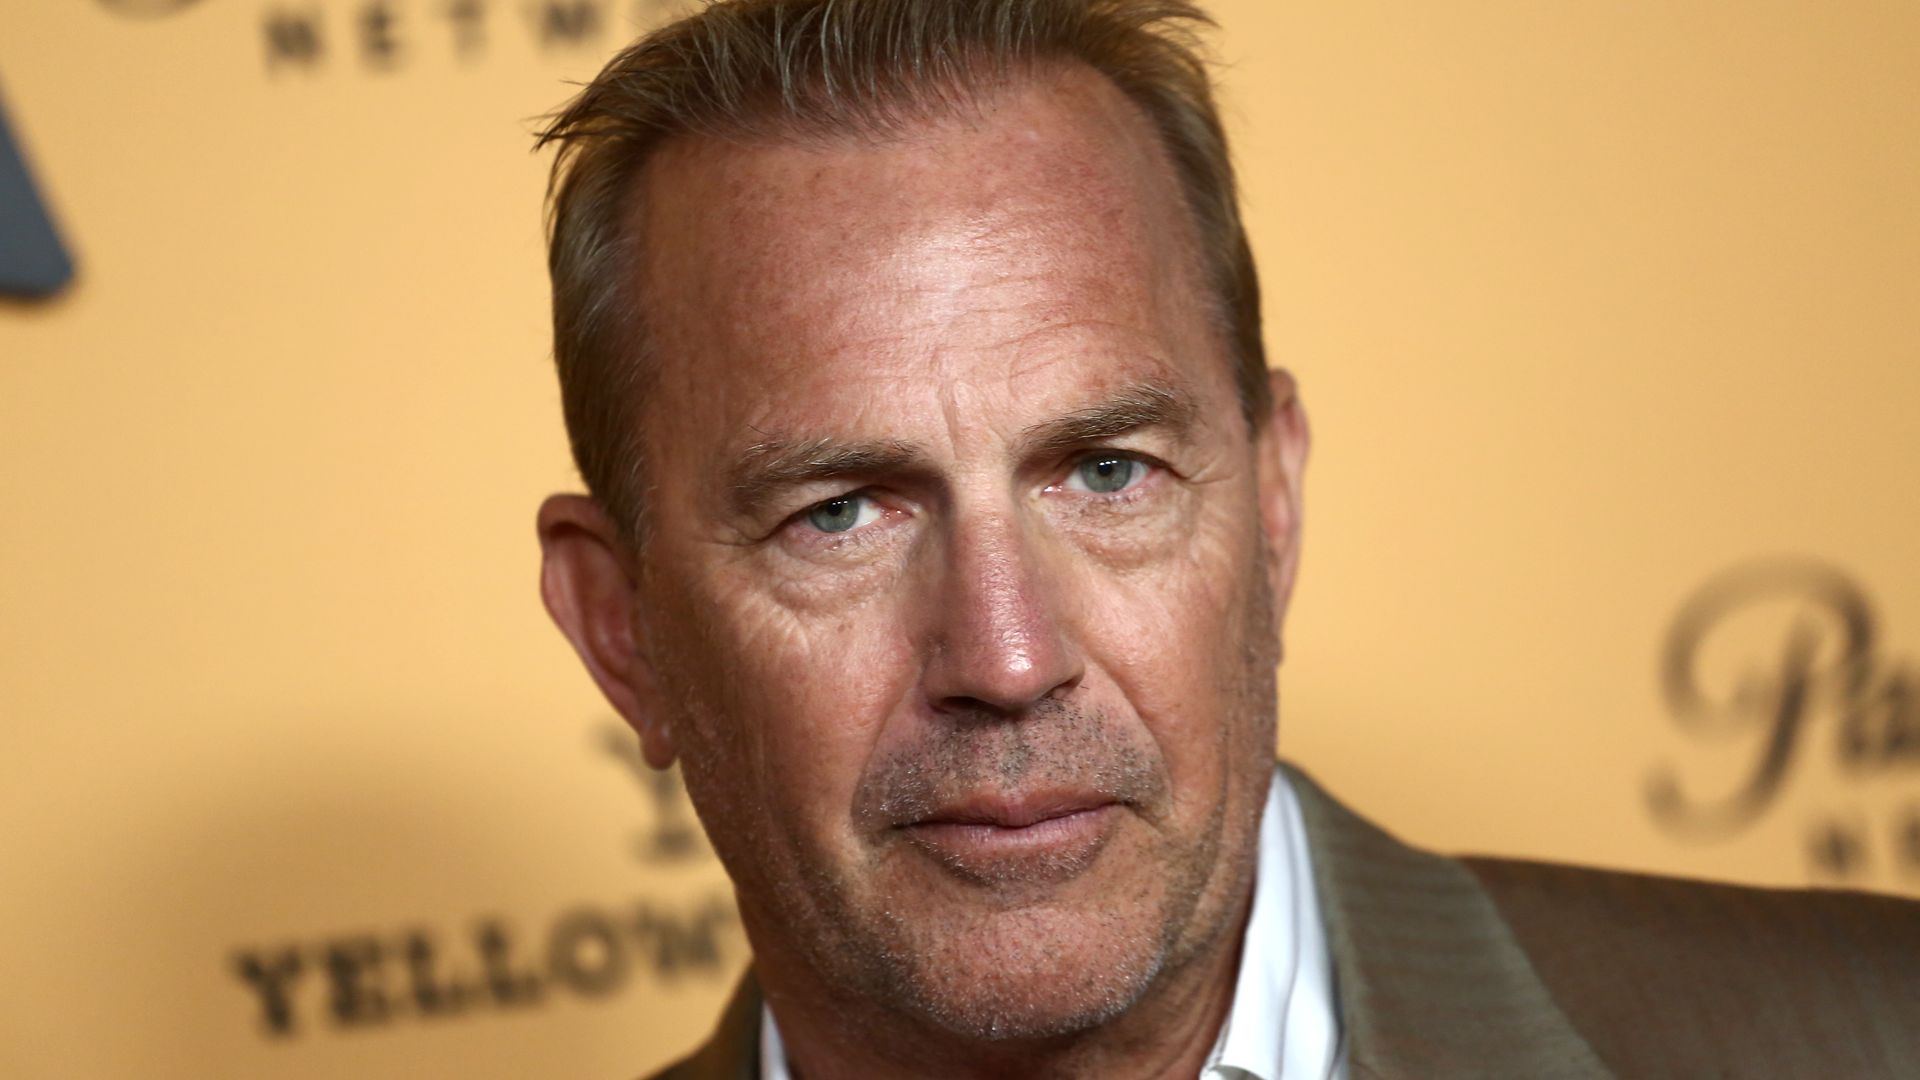 Kevin Costner on the red carpet in a smart outfit